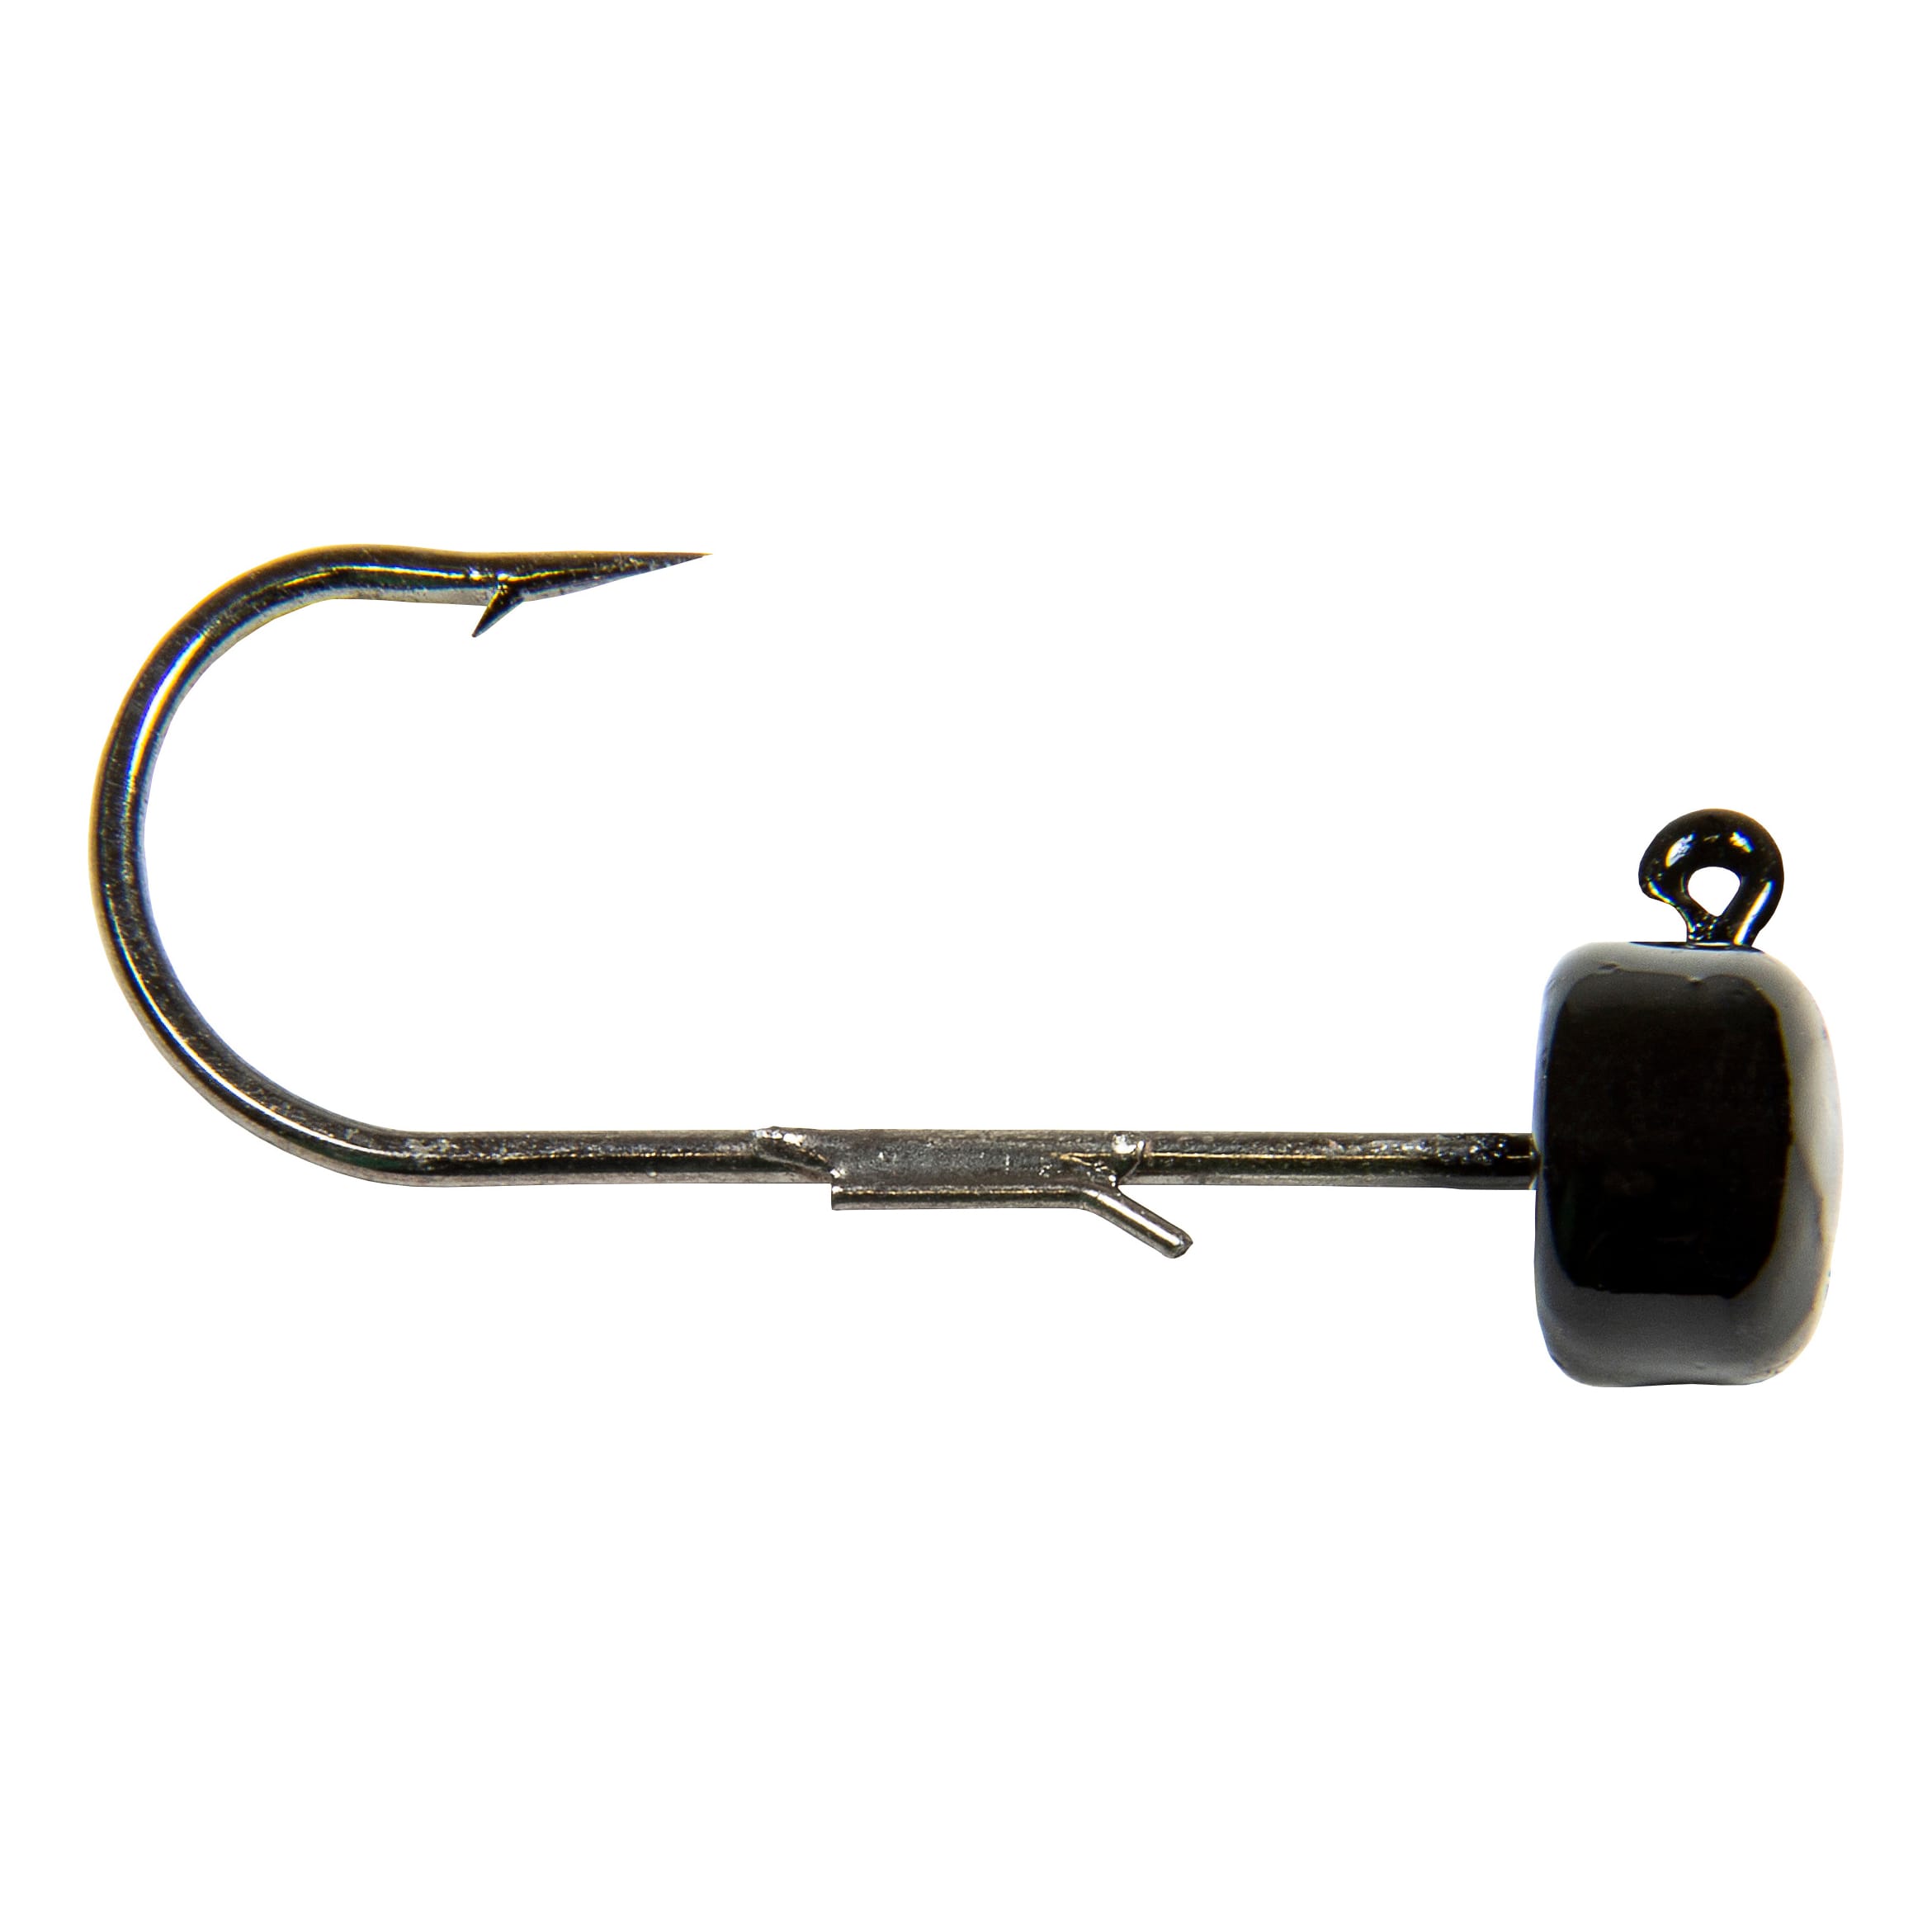 weighted fishing hooks, weighted fishing hooks Suppliers and